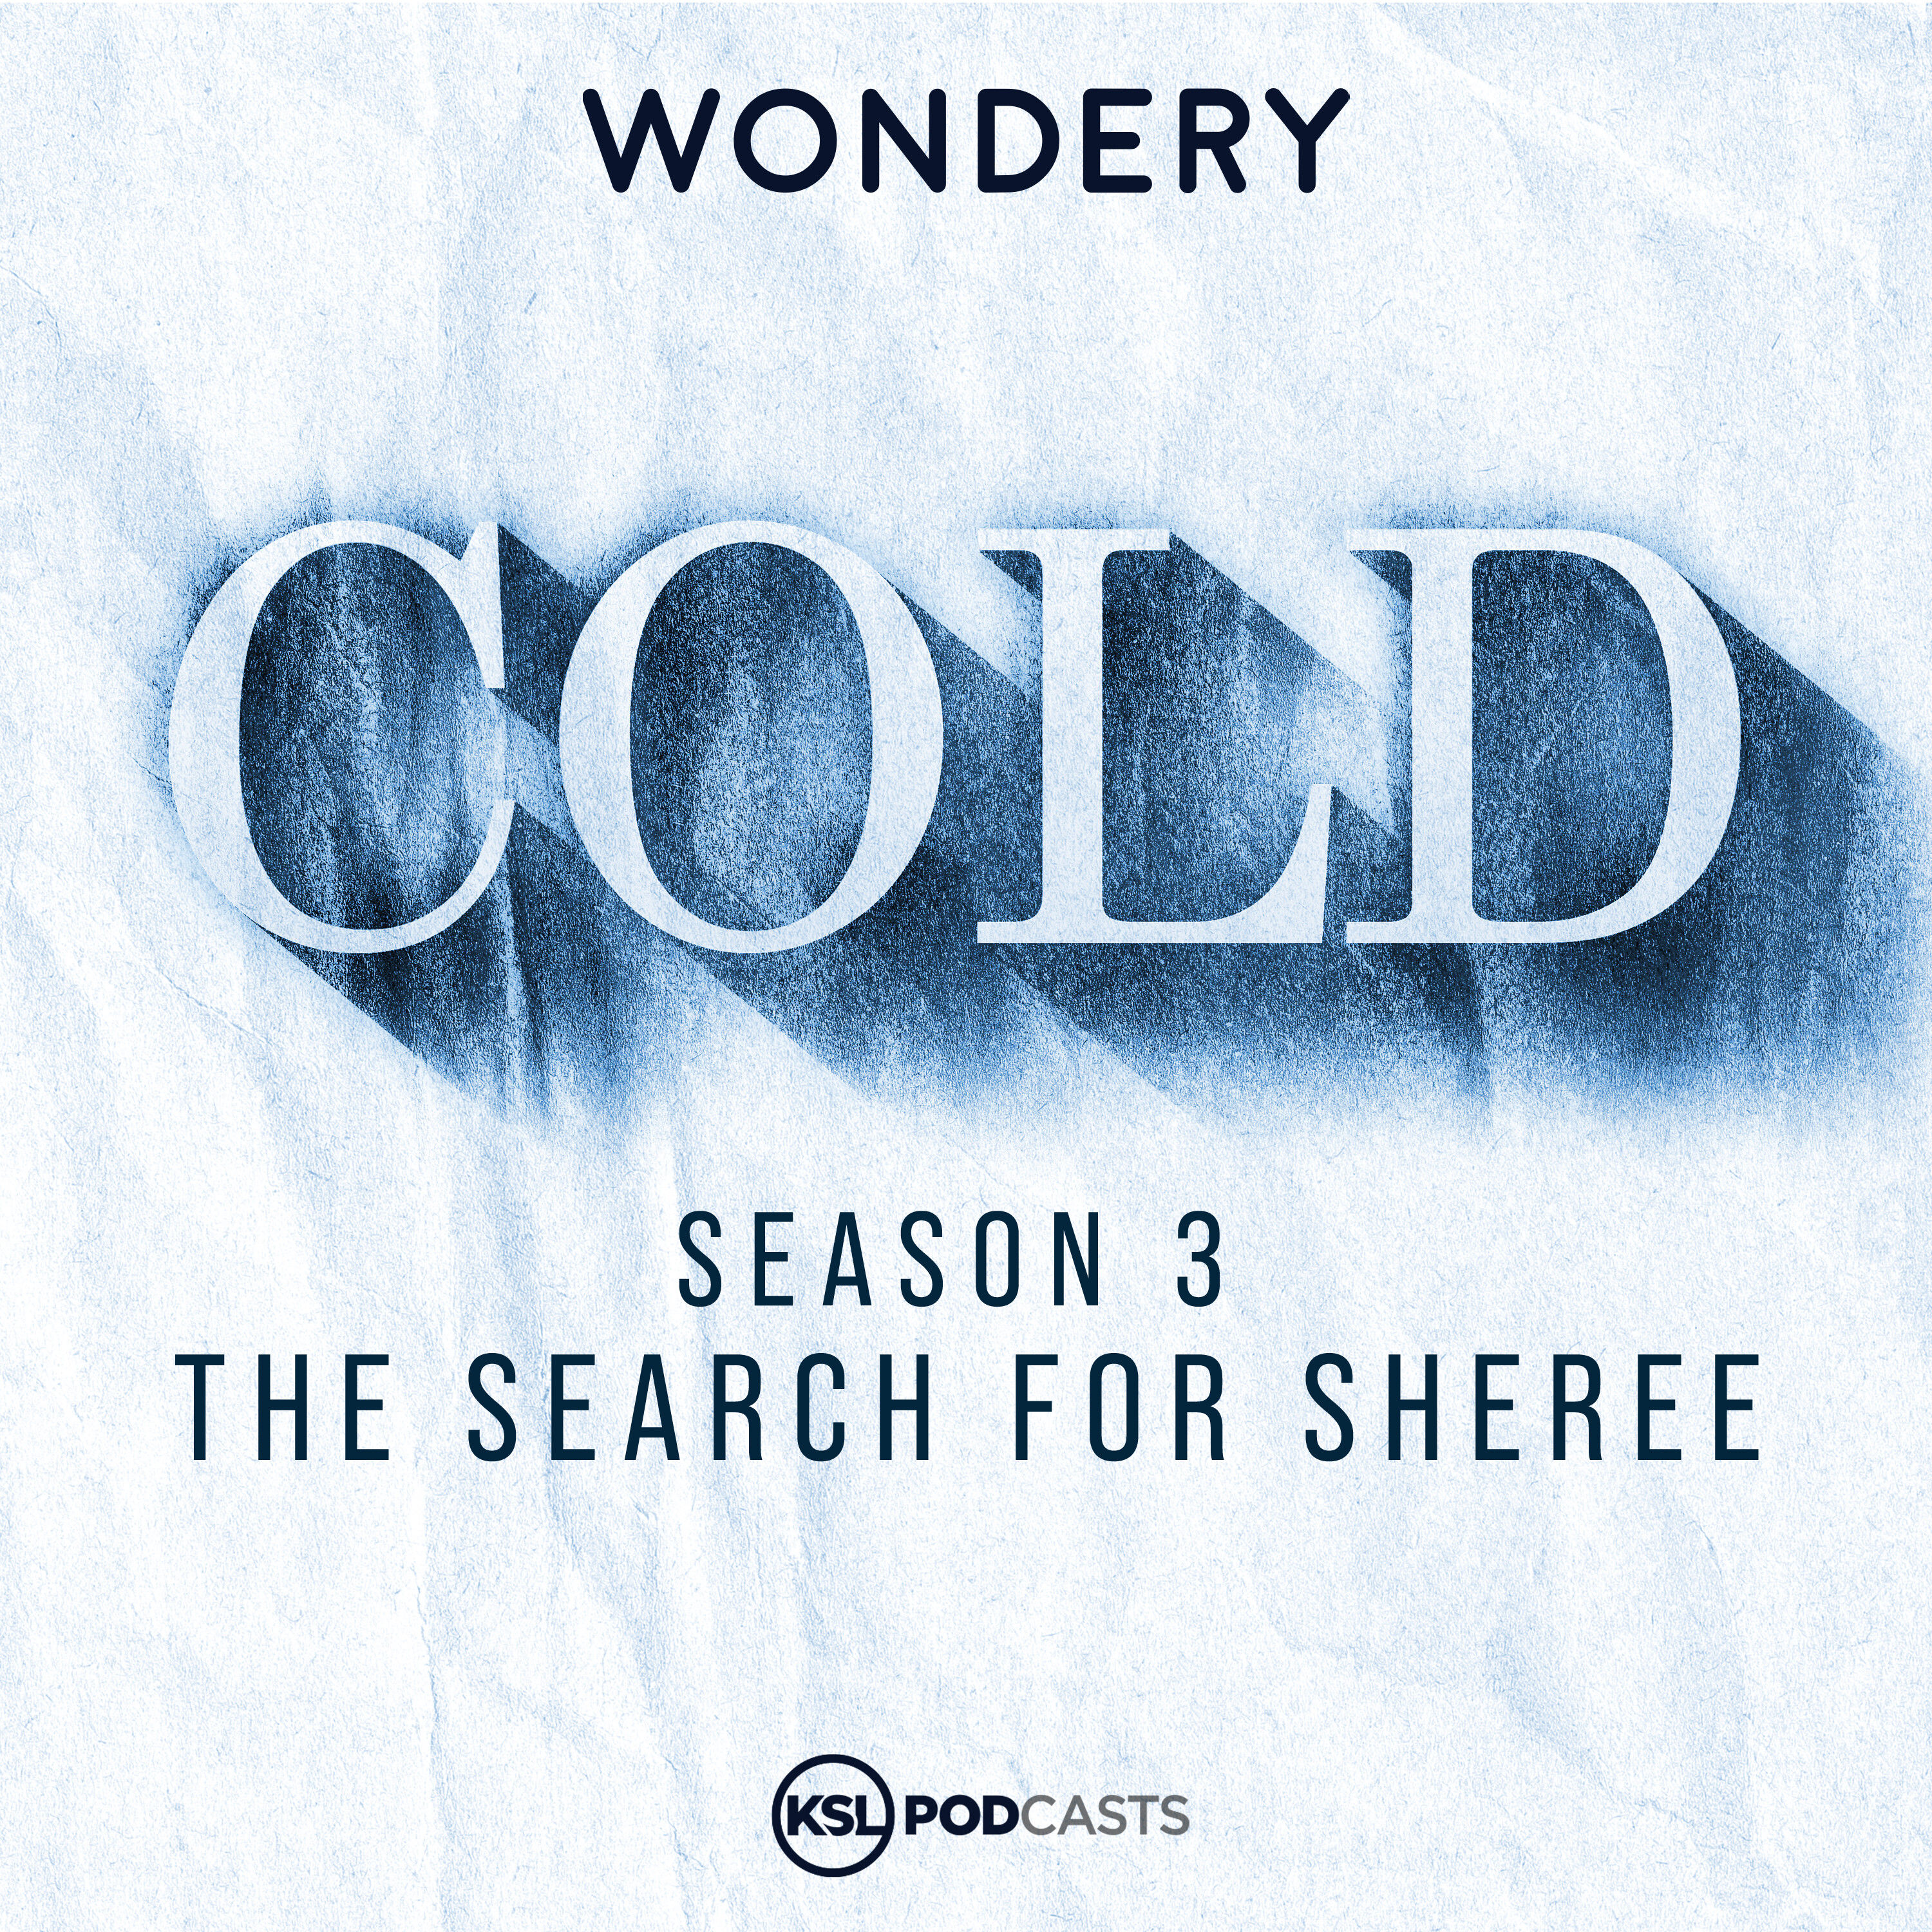 Introducing: The Search for Sheree Warren